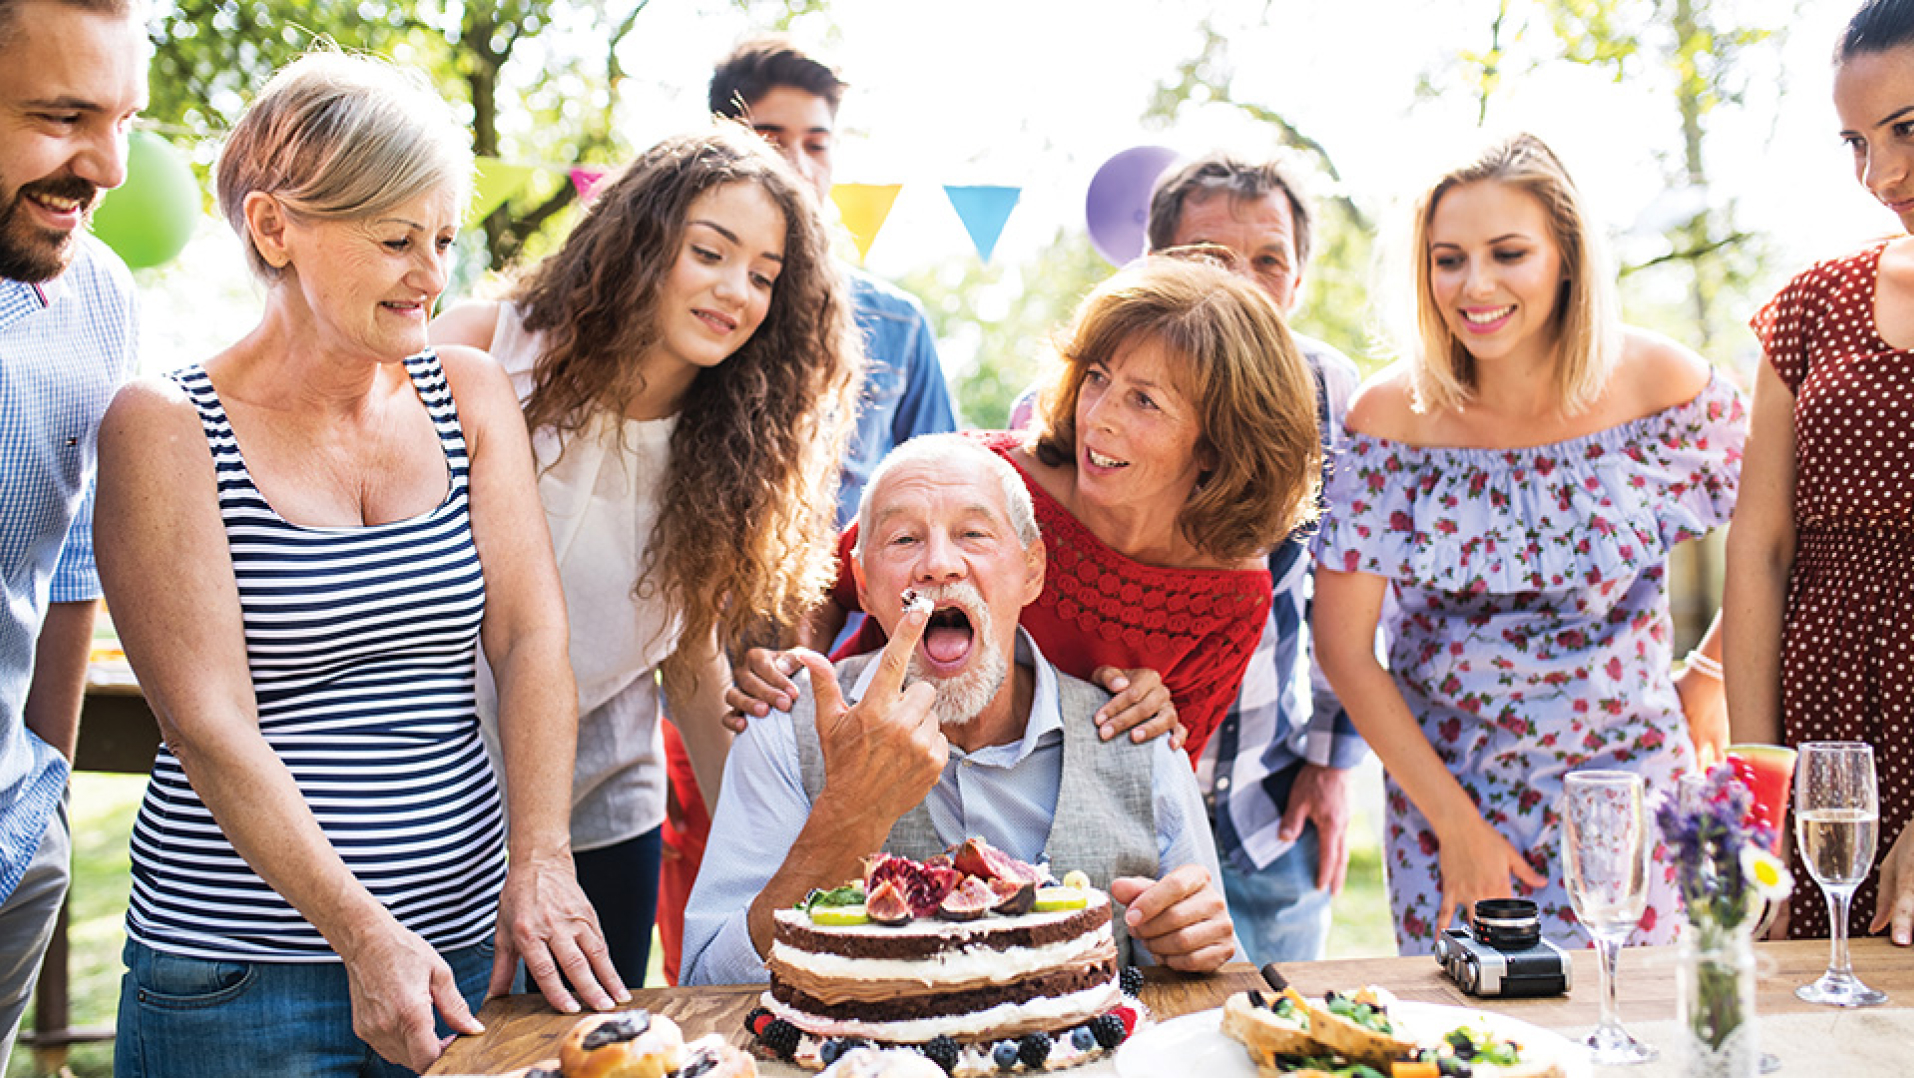 An older man surrounded by family members and loved ones at an outdoor celebration.